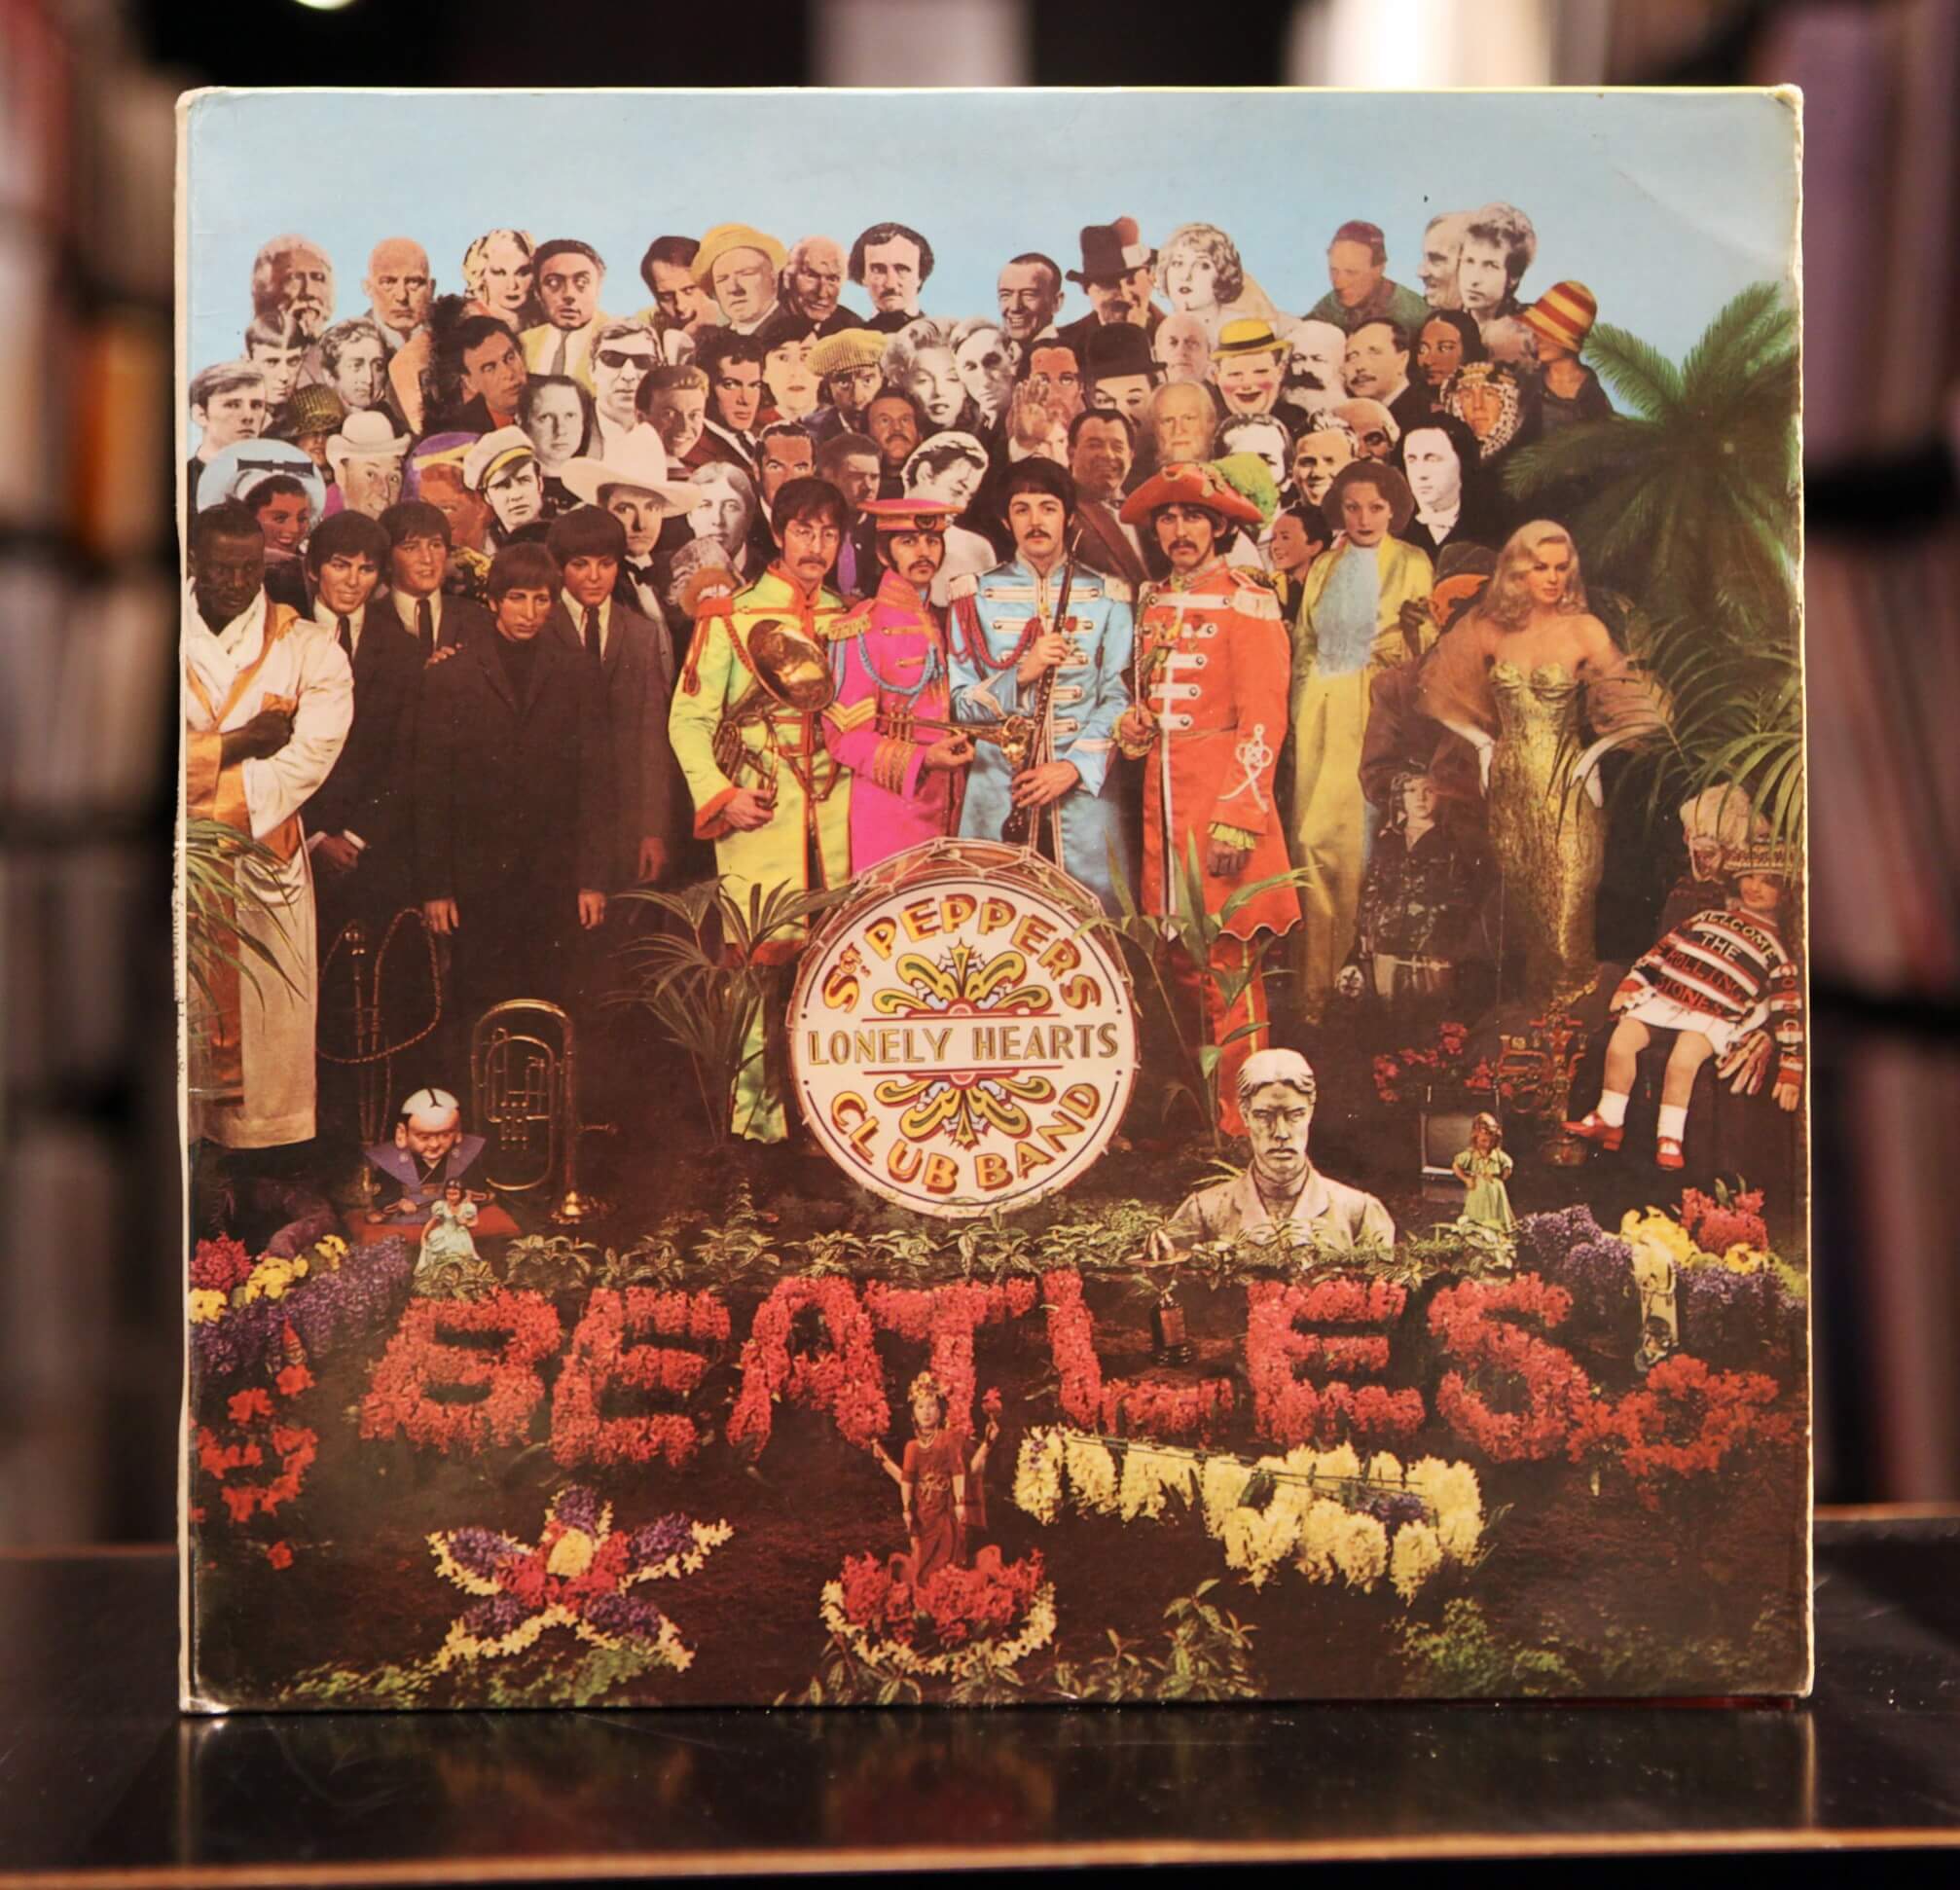 A vinyl copy of The Beatles' 'Sgt. Pepper's Lonely Hearts Club Band'